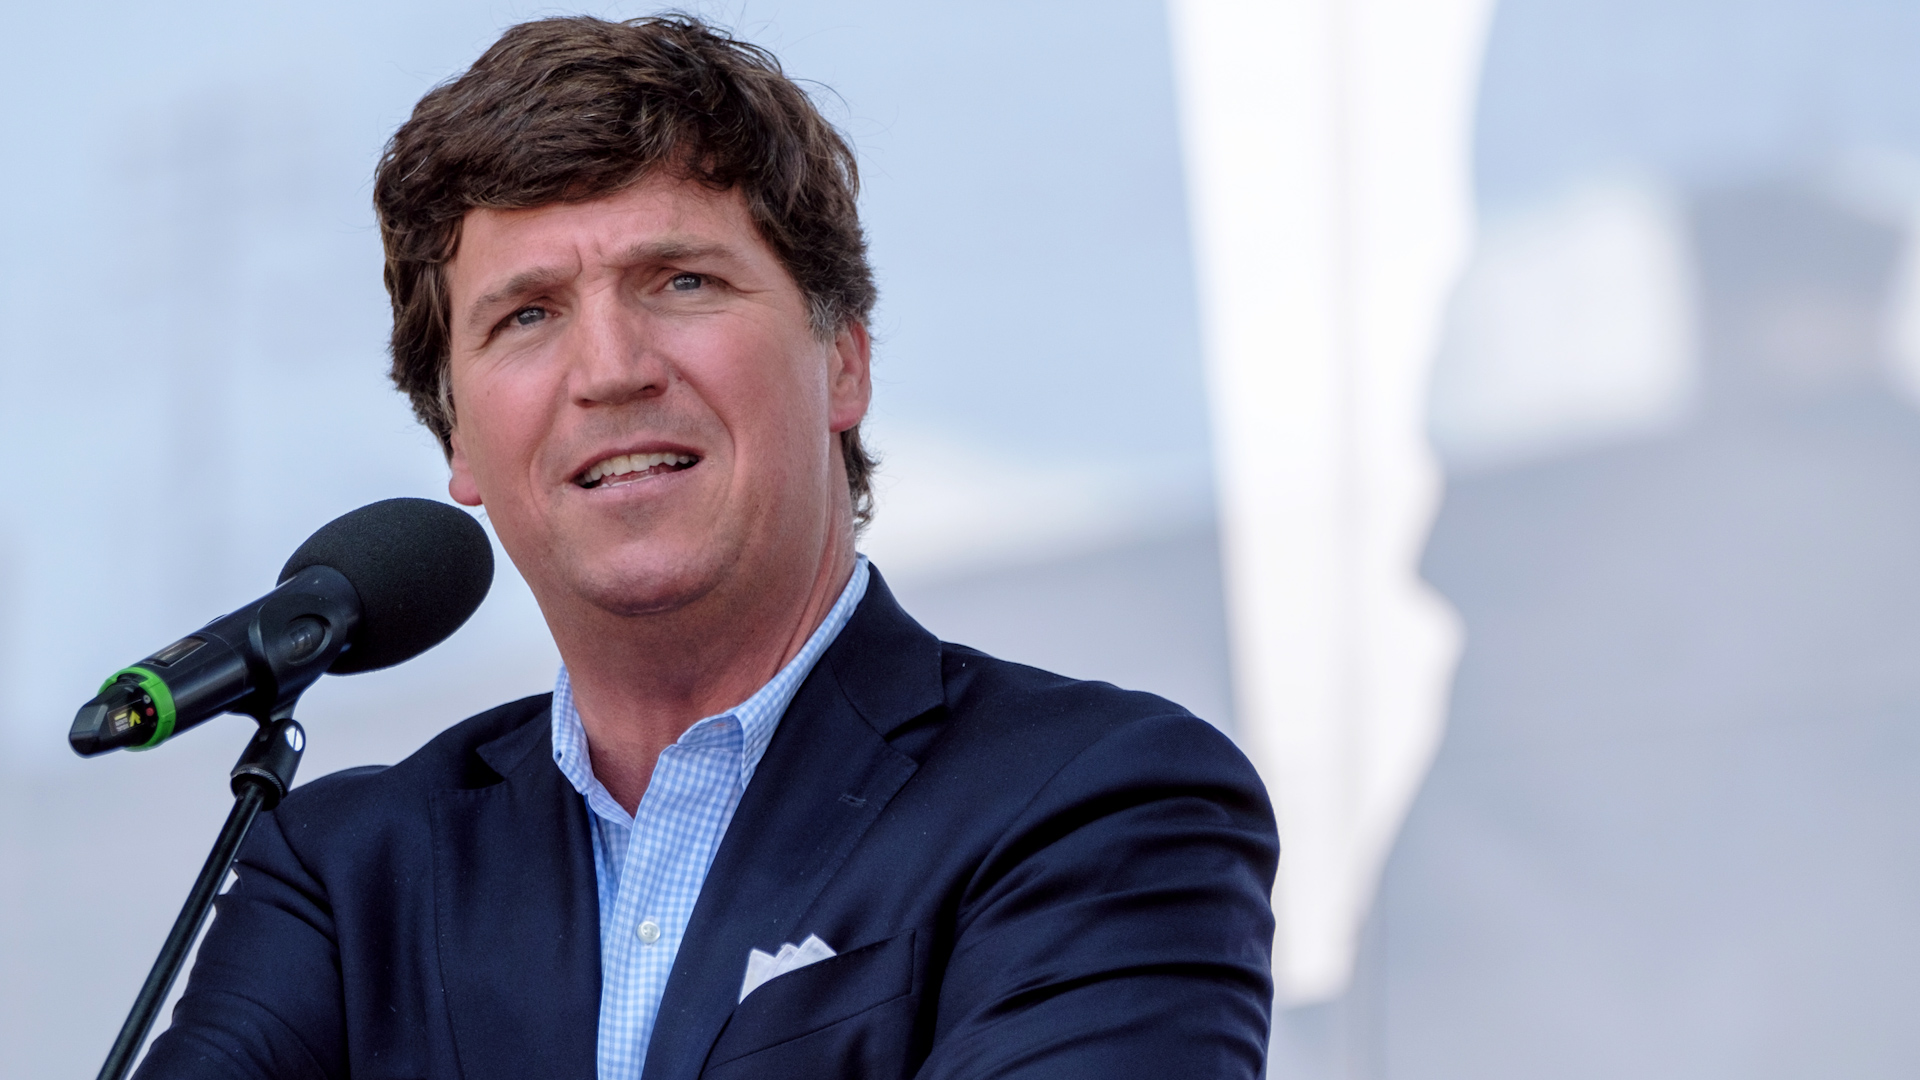 Tucker Carlson is reportedly launching a Twitter-based media company while Twitter delights users with its new revenue sharing program.